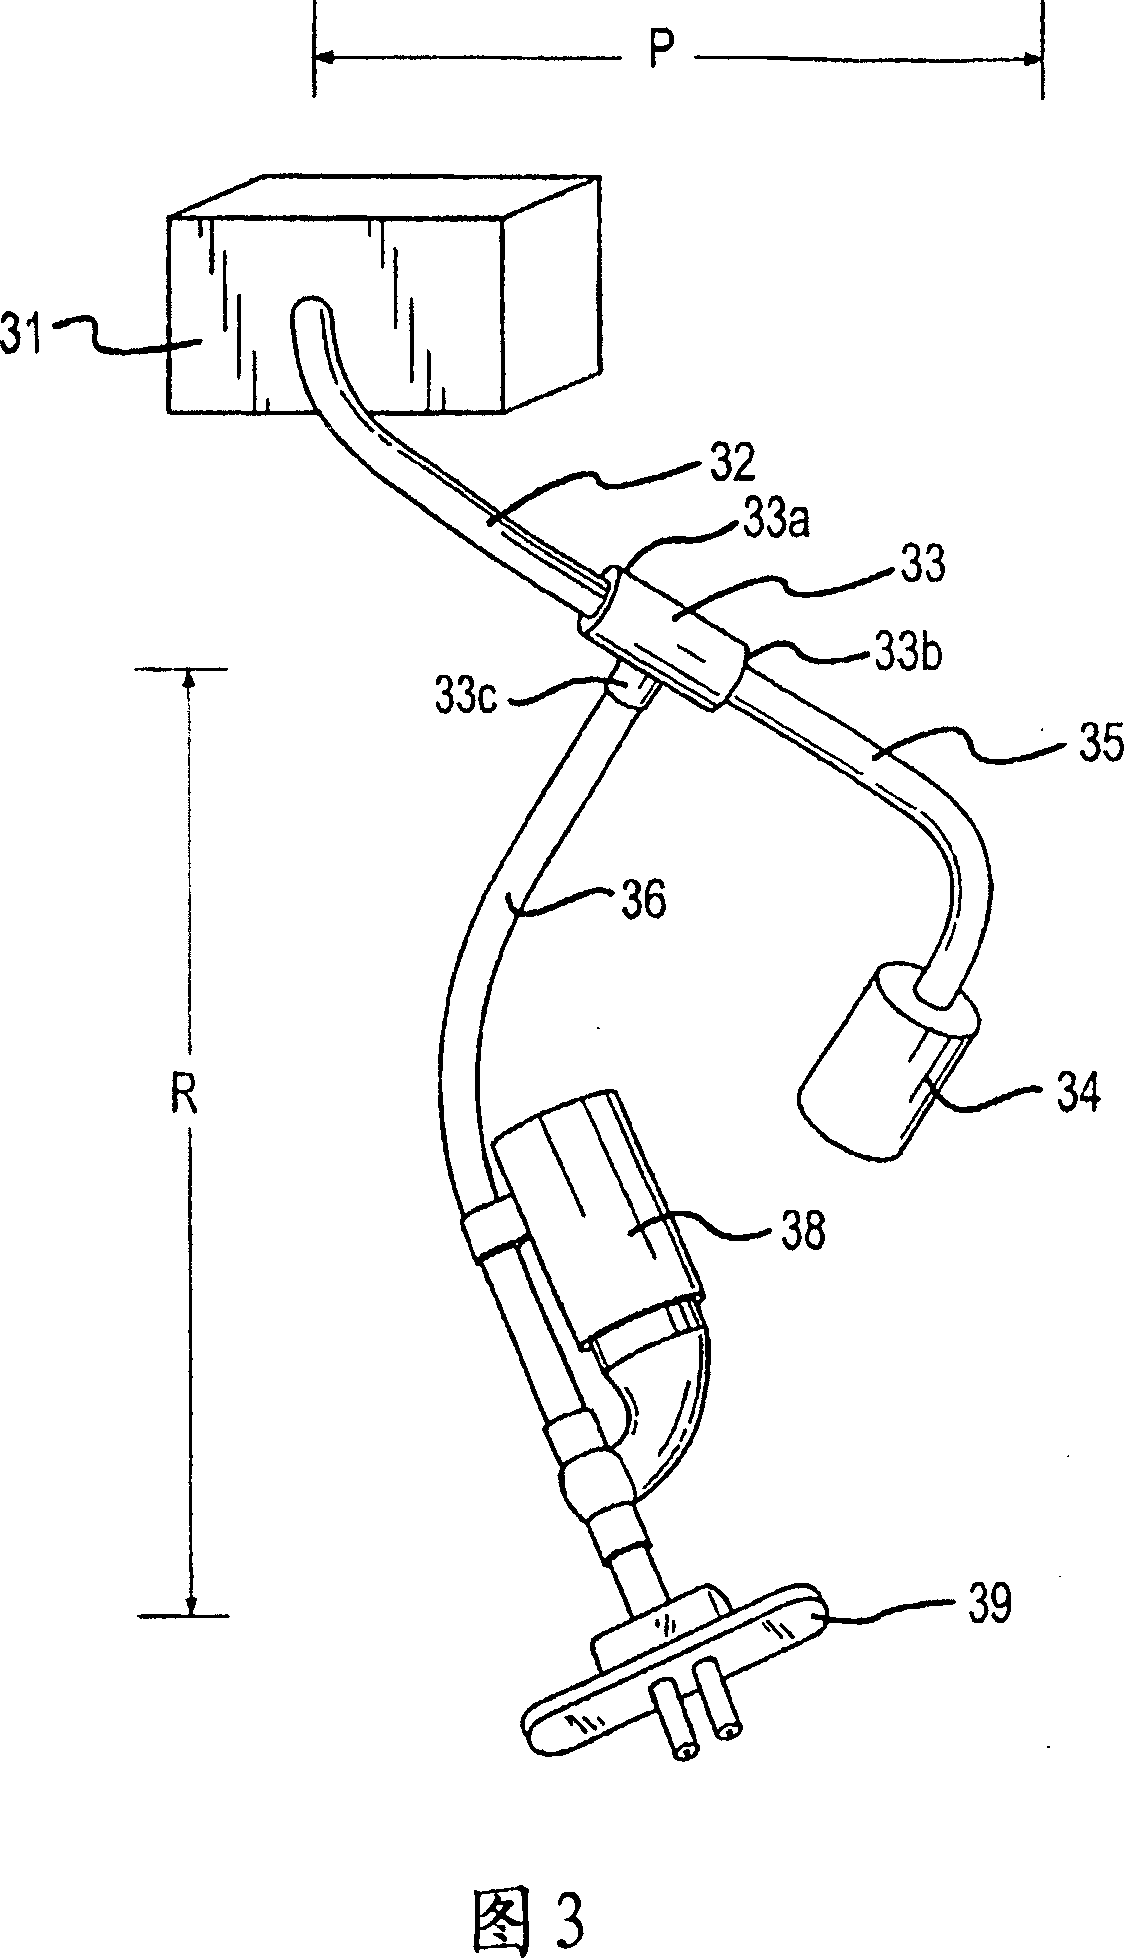 Aerosol delivery apparatus, method and preparation for pressure-assisted breathing systems